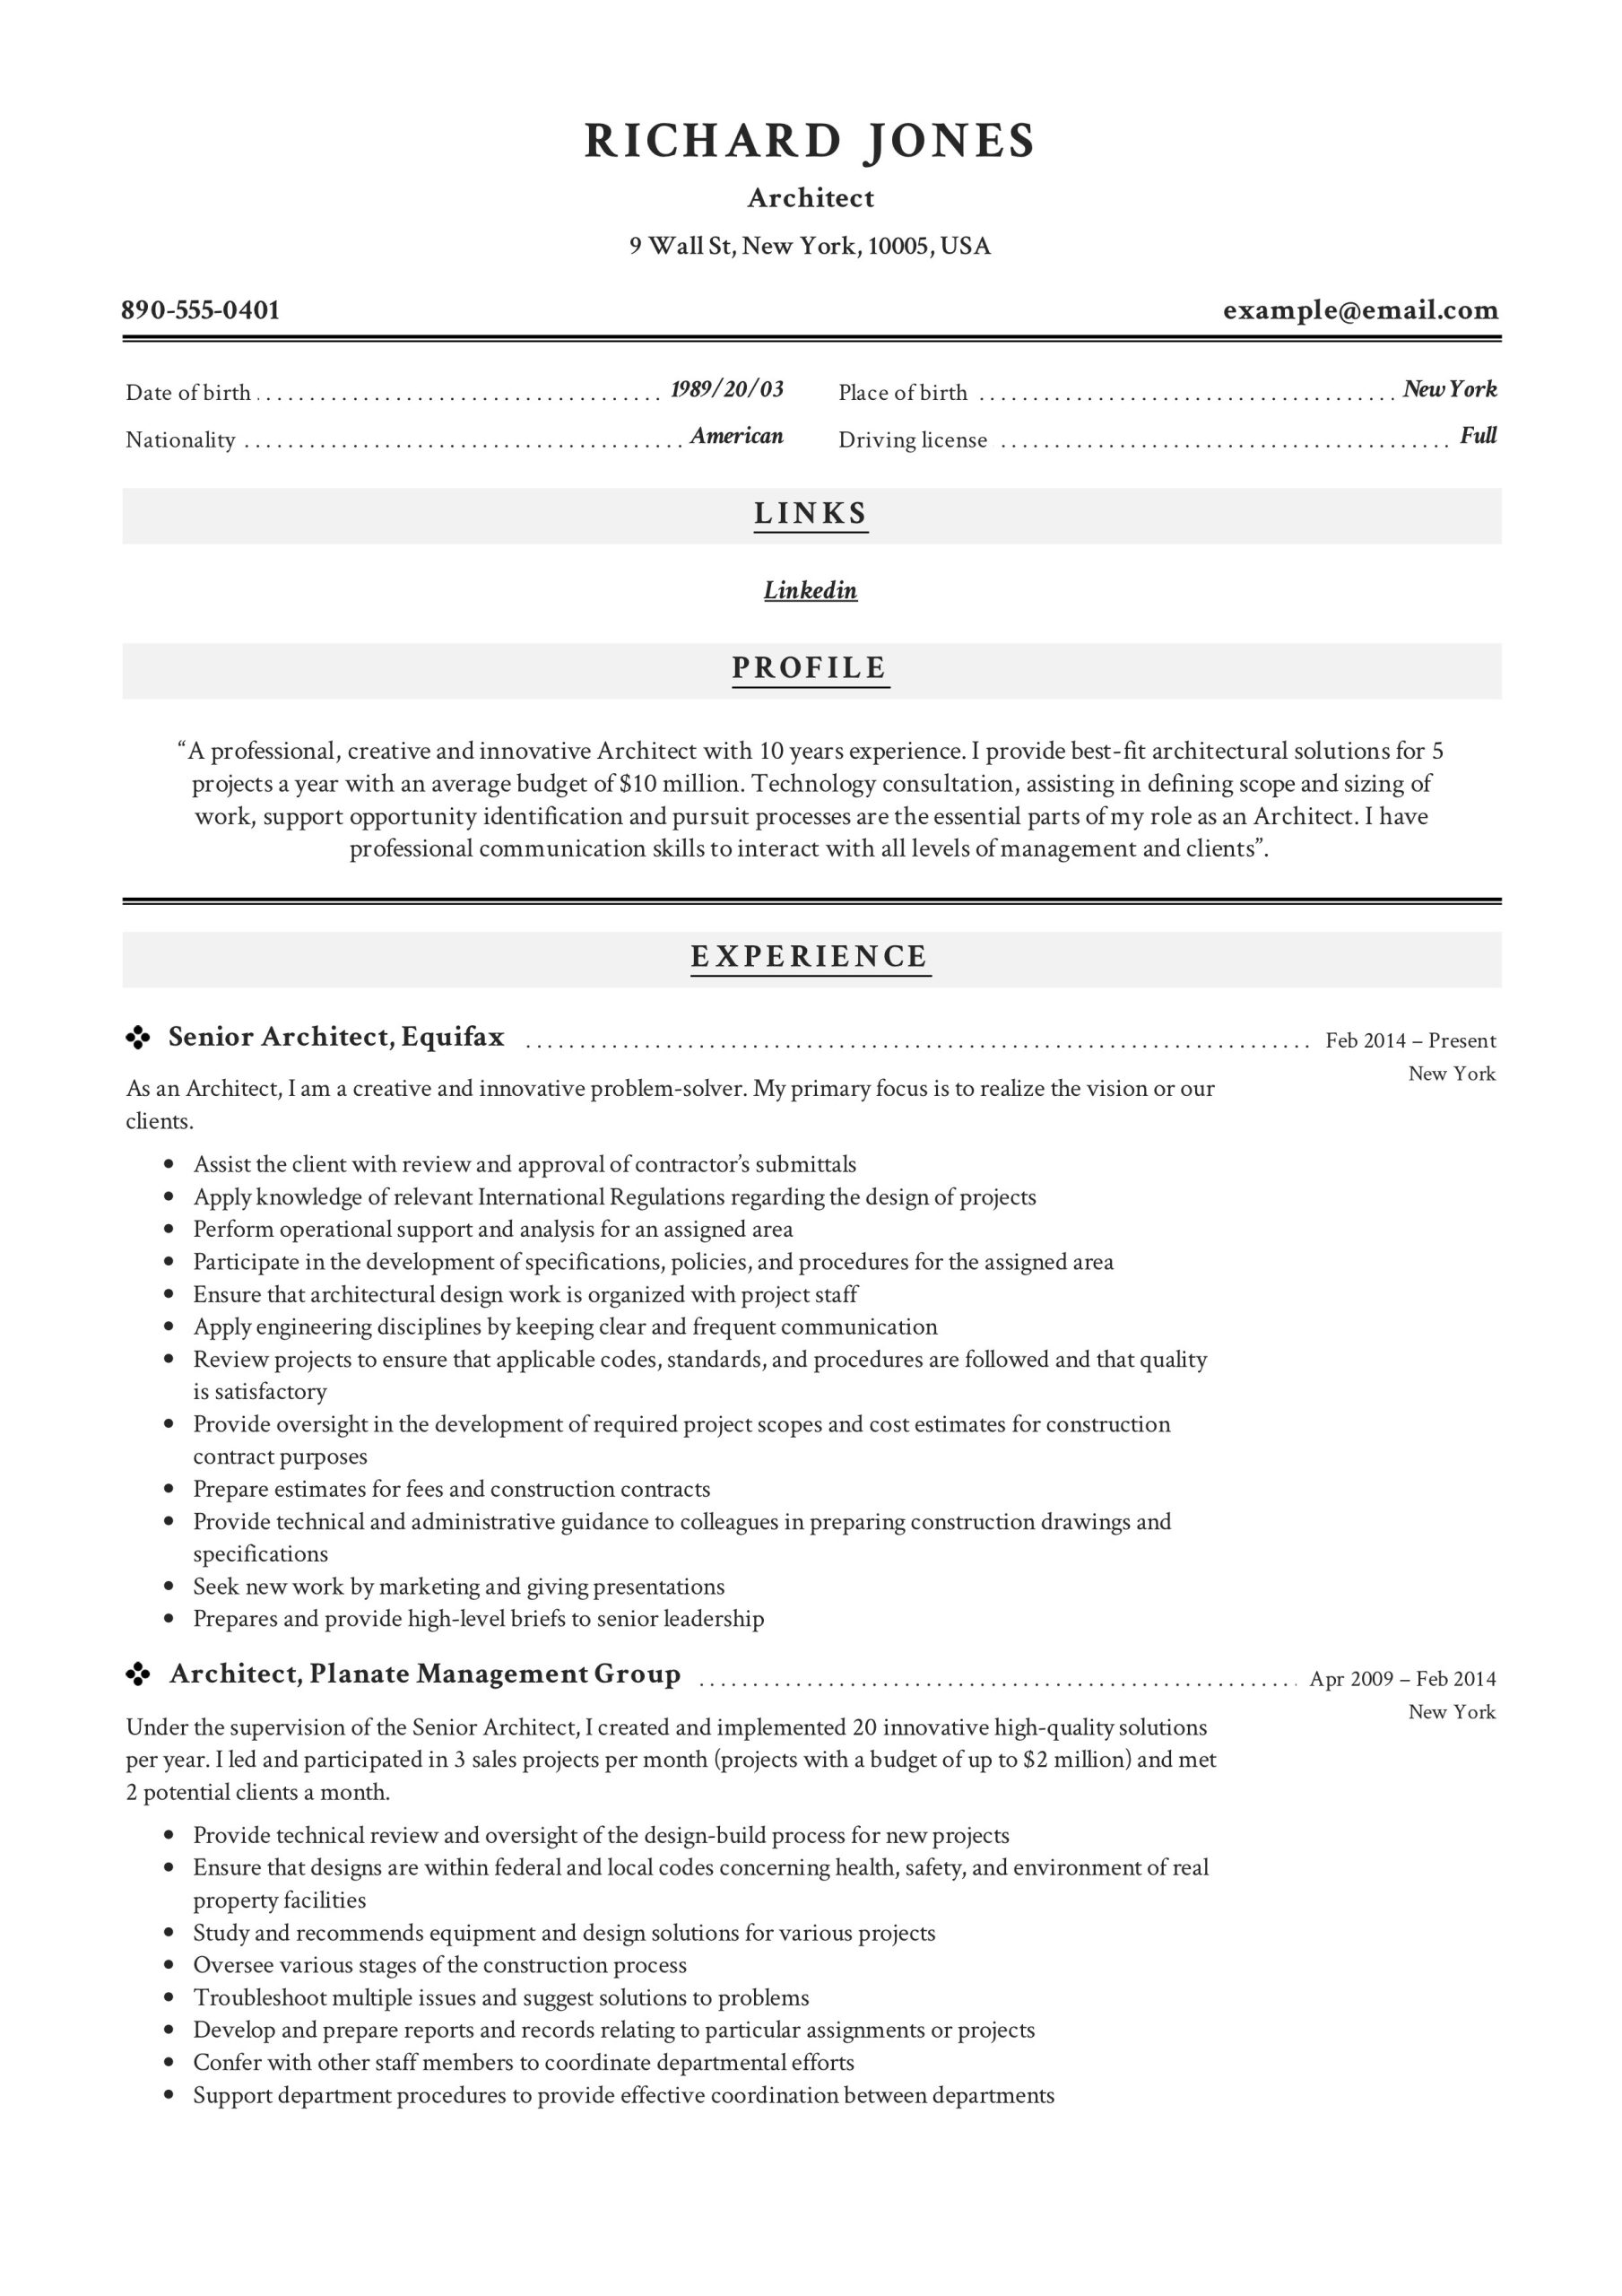 Sample Resume for Experienced Architectural Draftsman Architect Resume & Writing Guide   19 Samples Pdf & Word 2022